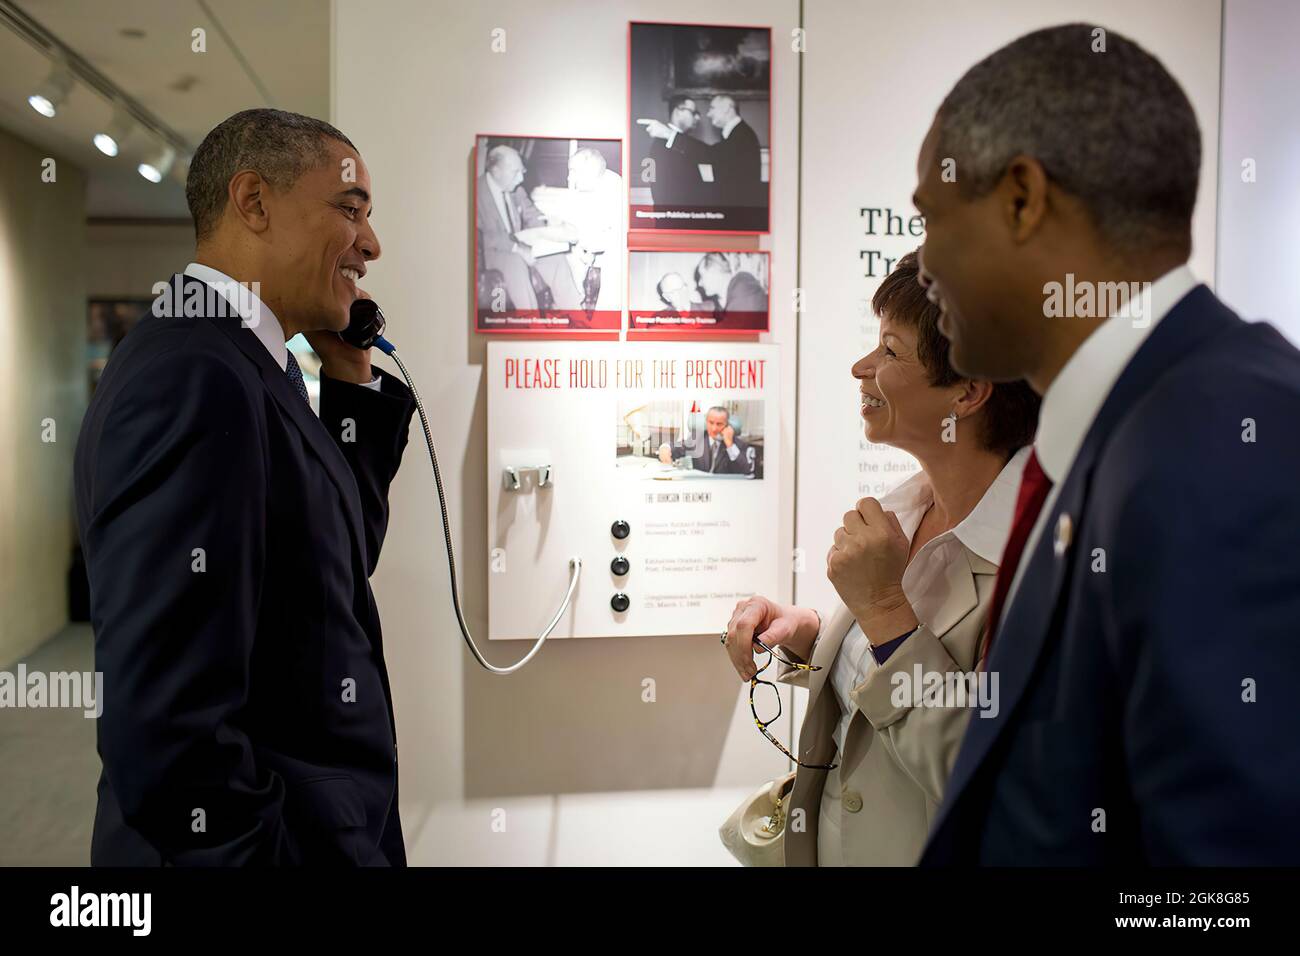 President Barack Obama, with Senior Advisor Valerie Jarrett and Marty Nesbitt, founding board member of The Barack Obama Foundation, listens to a recording of a President Johnson phone call during a tour of the Lyndon Baines Johnson Presidential Library in Austin, Texas, April 10, 2014. (Official White House Photo by Pete Souza)  This official White House photograph is being made available only for publication by news organizations and/or for personal use printing by the subject(s) of the photograph. The photograph may not be manipulated in any way and may not be used in commercial or politica Stock Photo